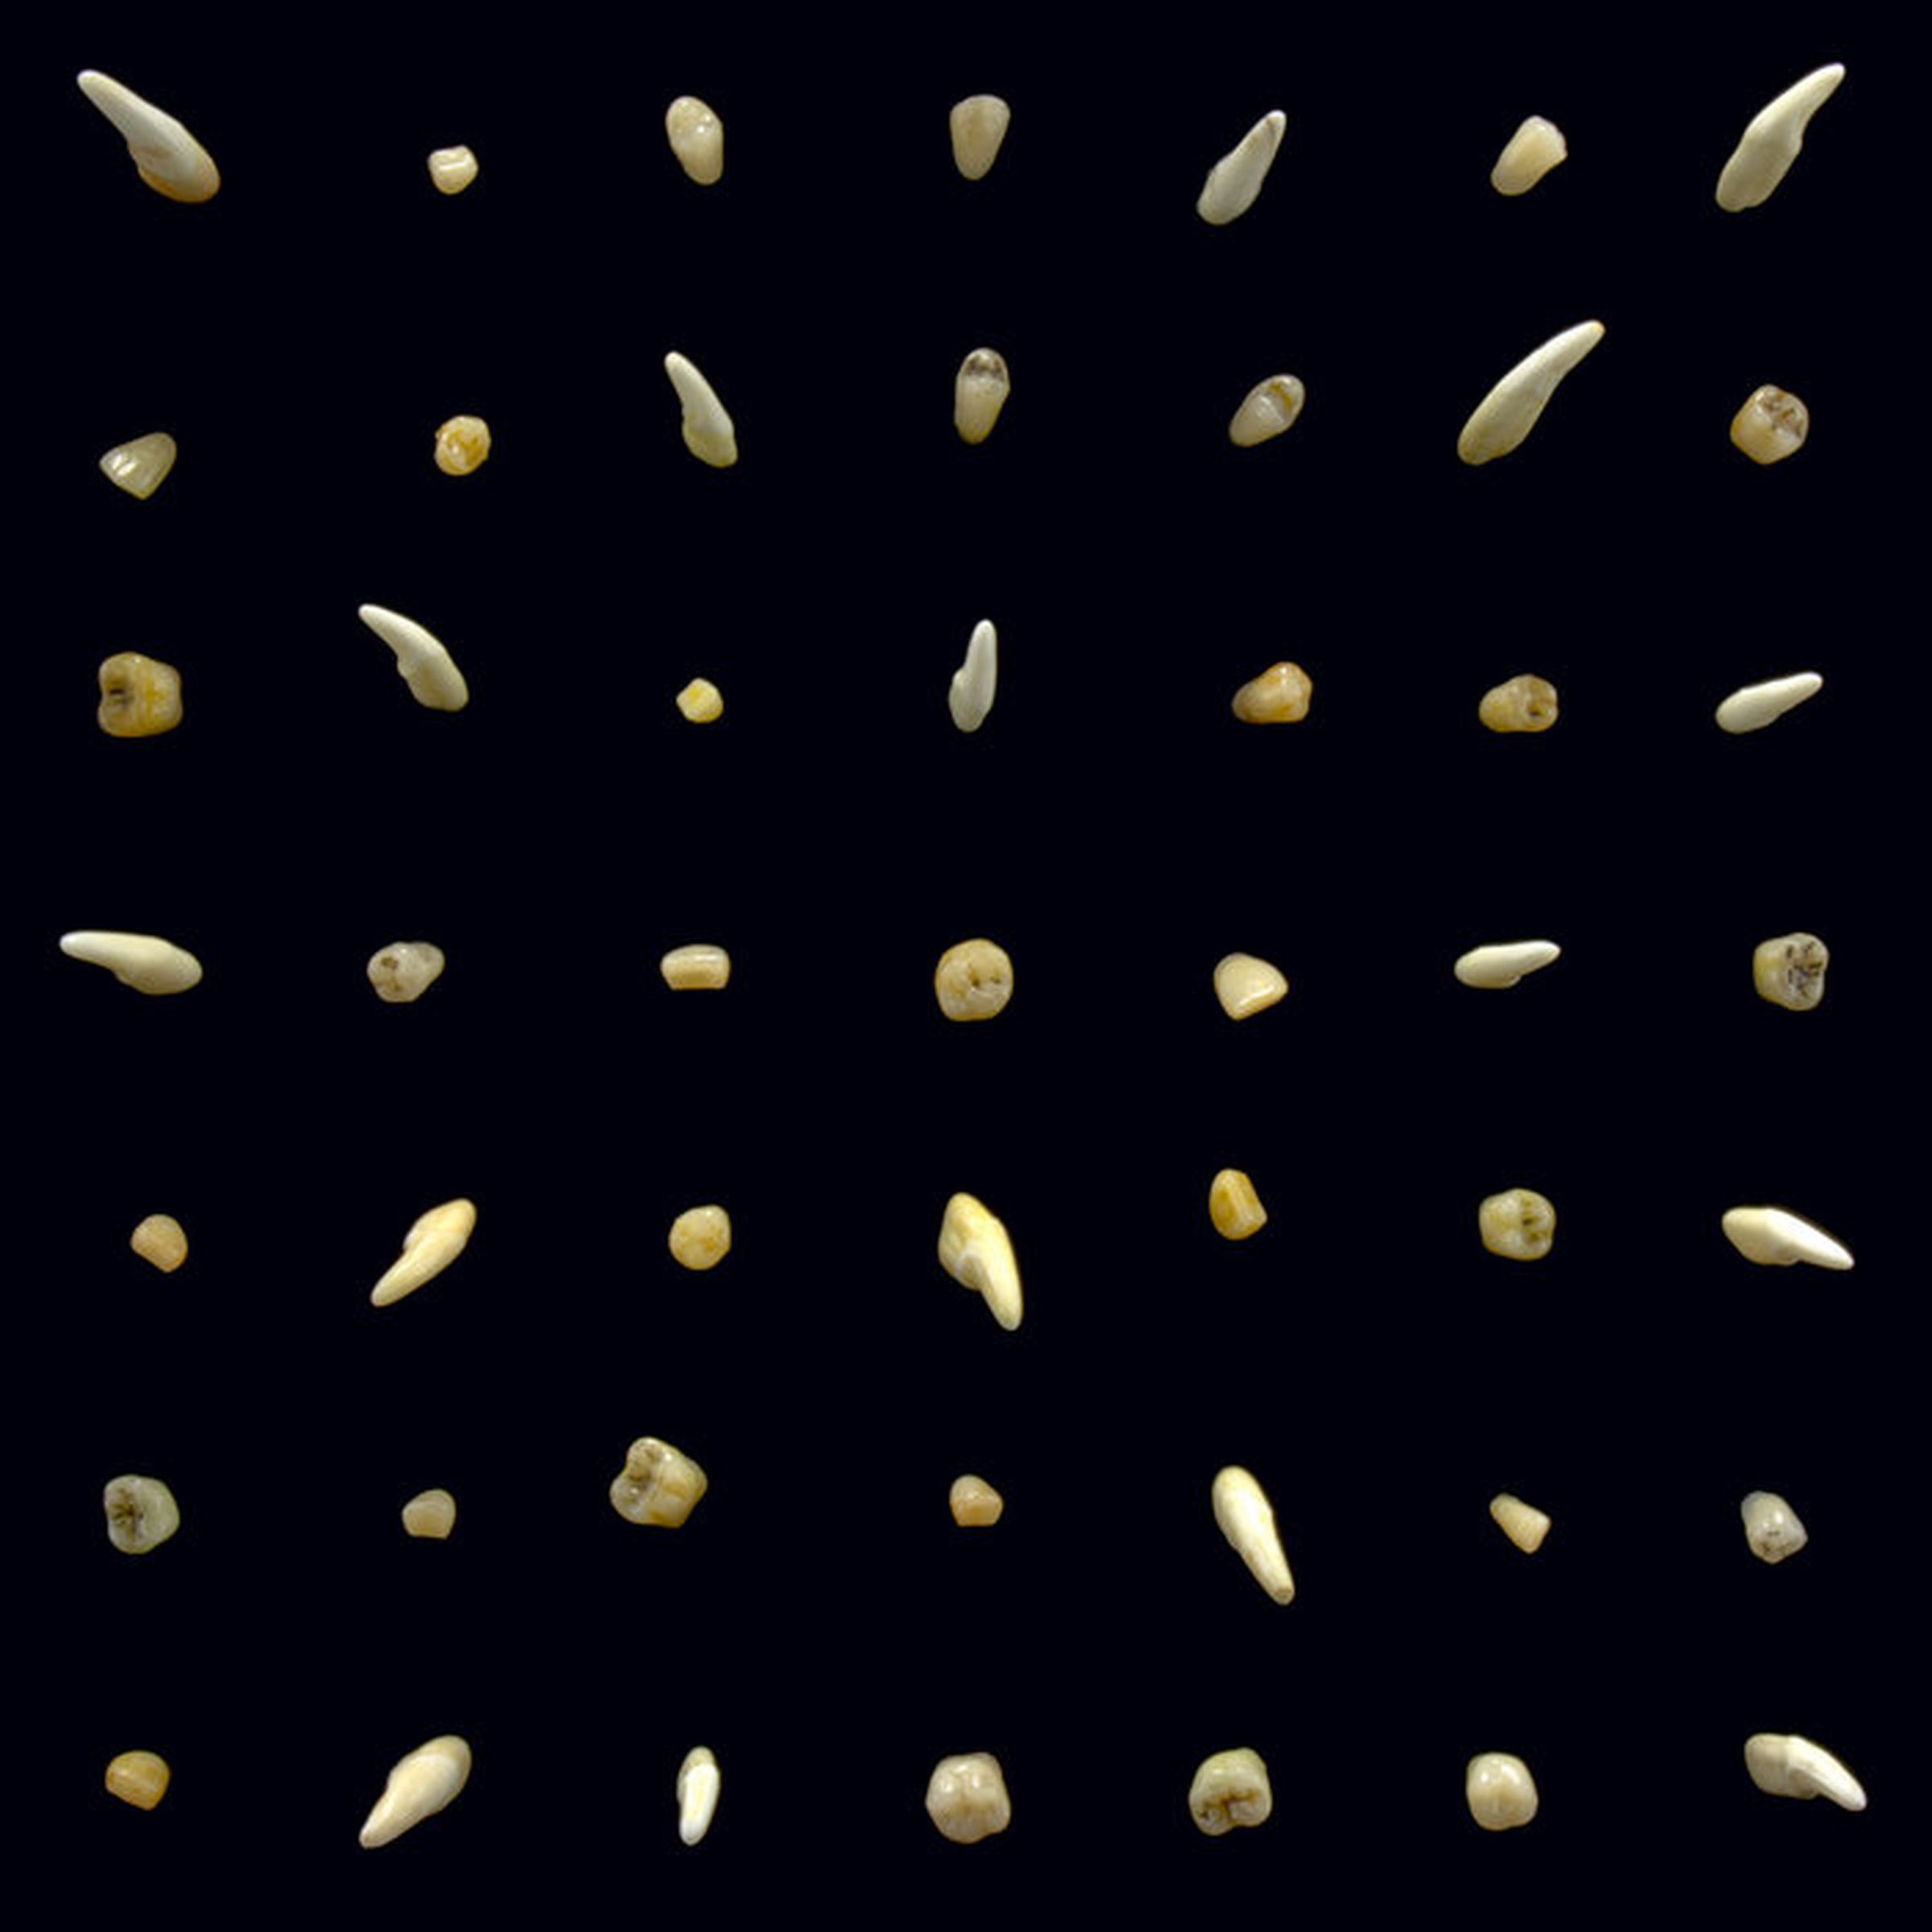 Rows of teeth against a black background